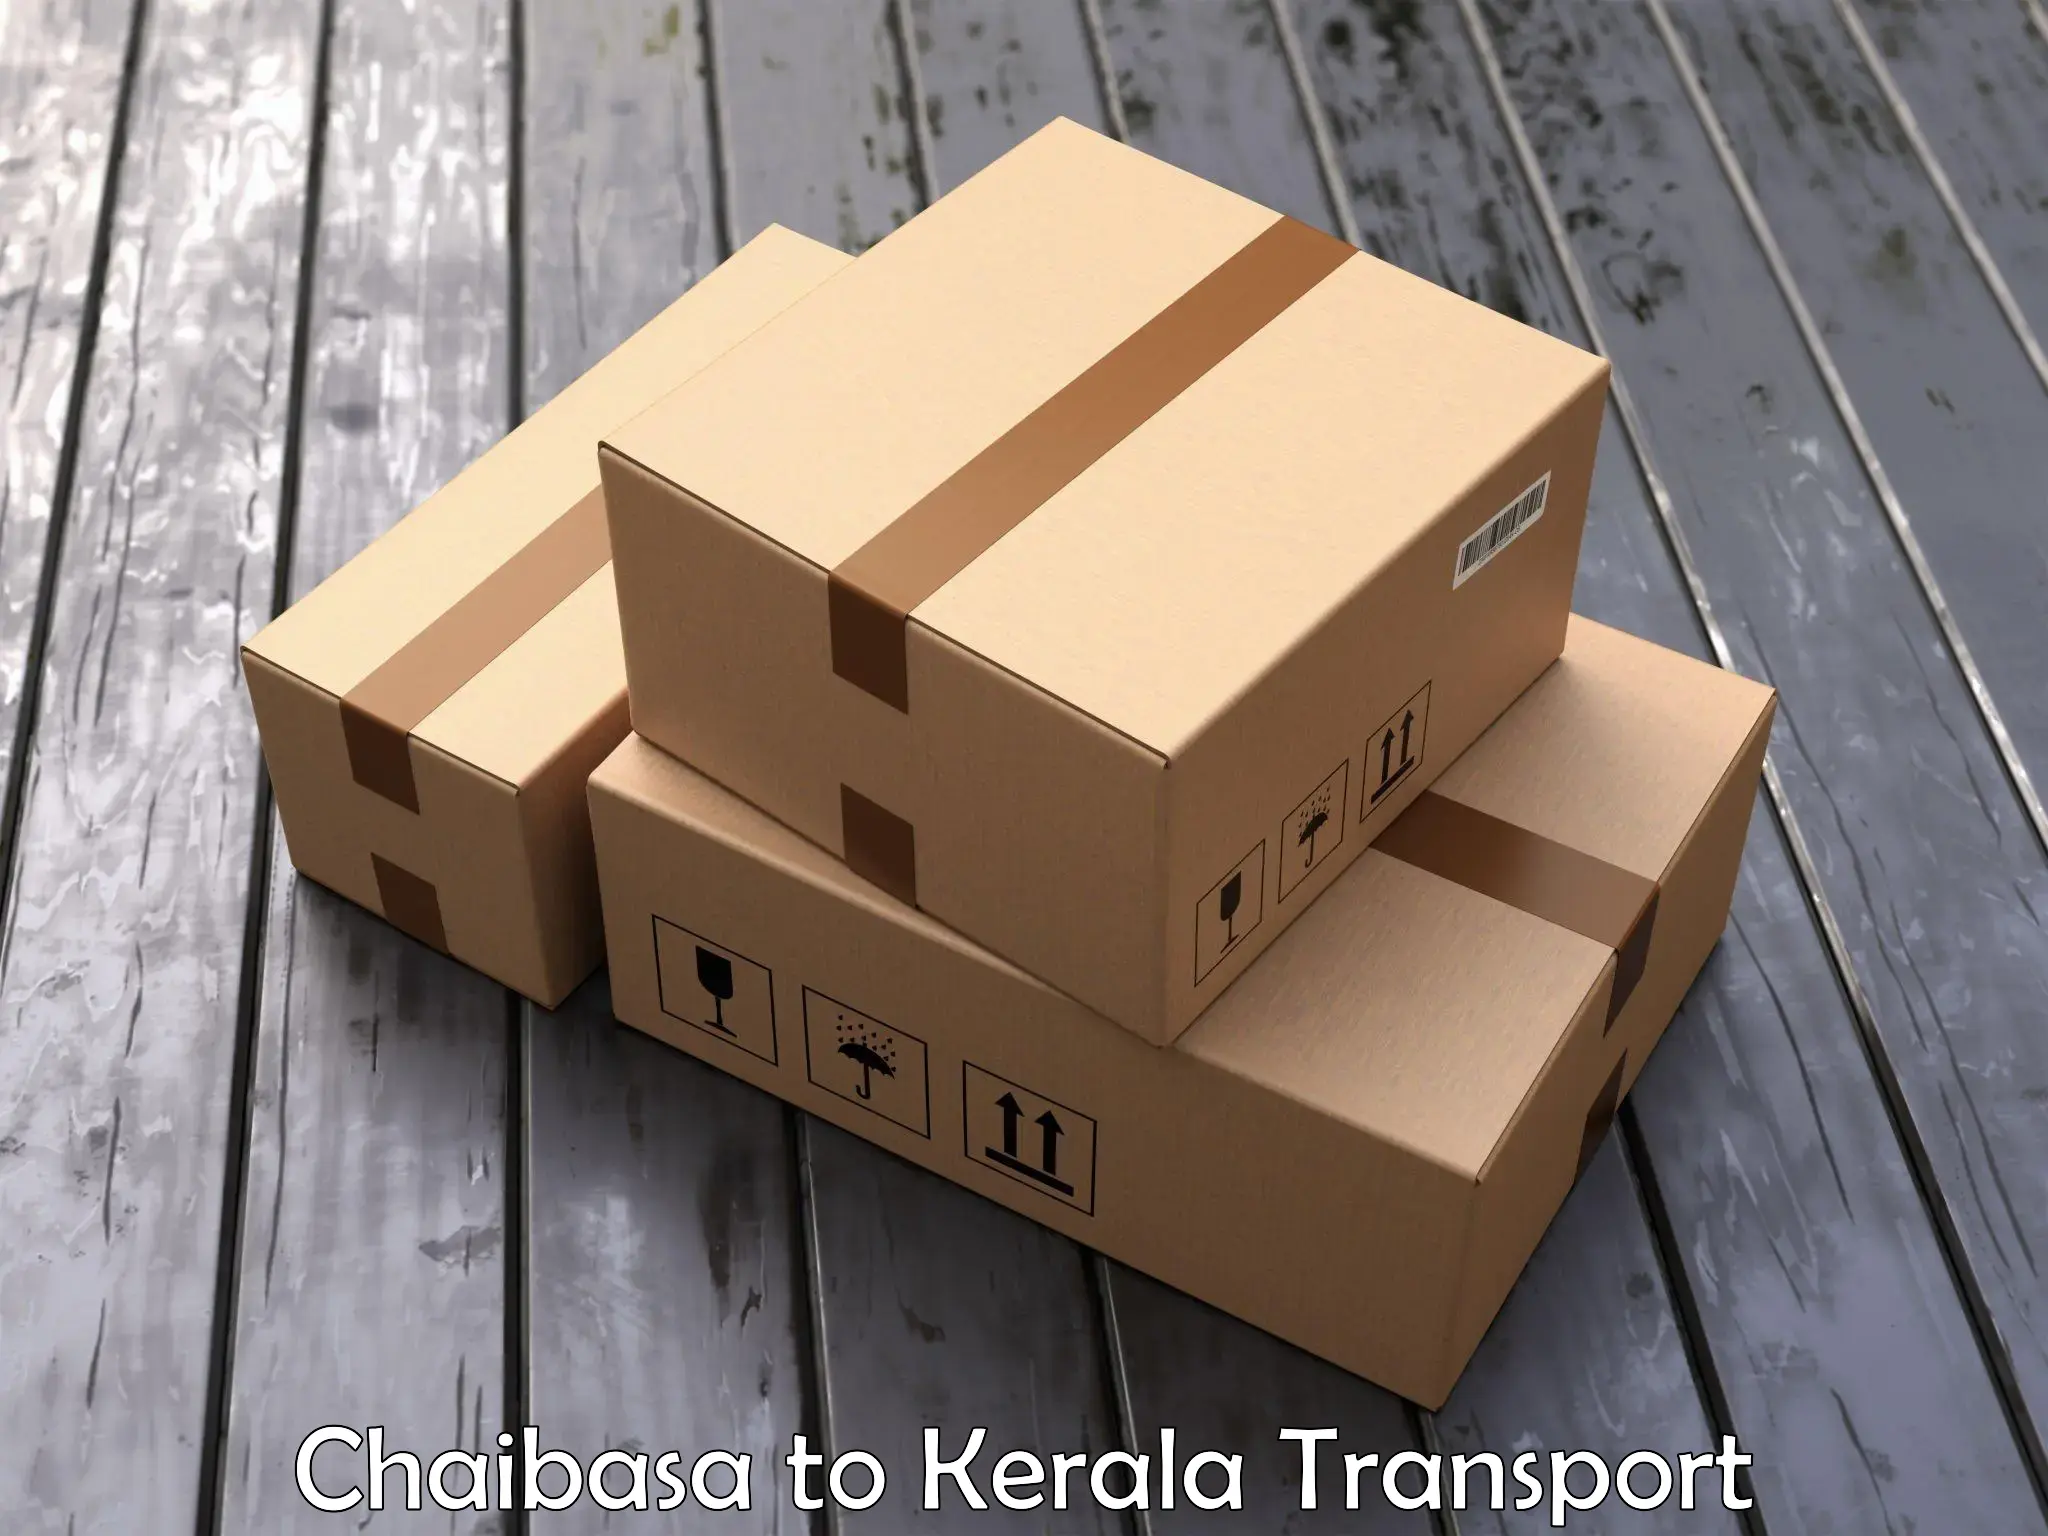 Truck transport companies in India Chaibasa to Alappuzha